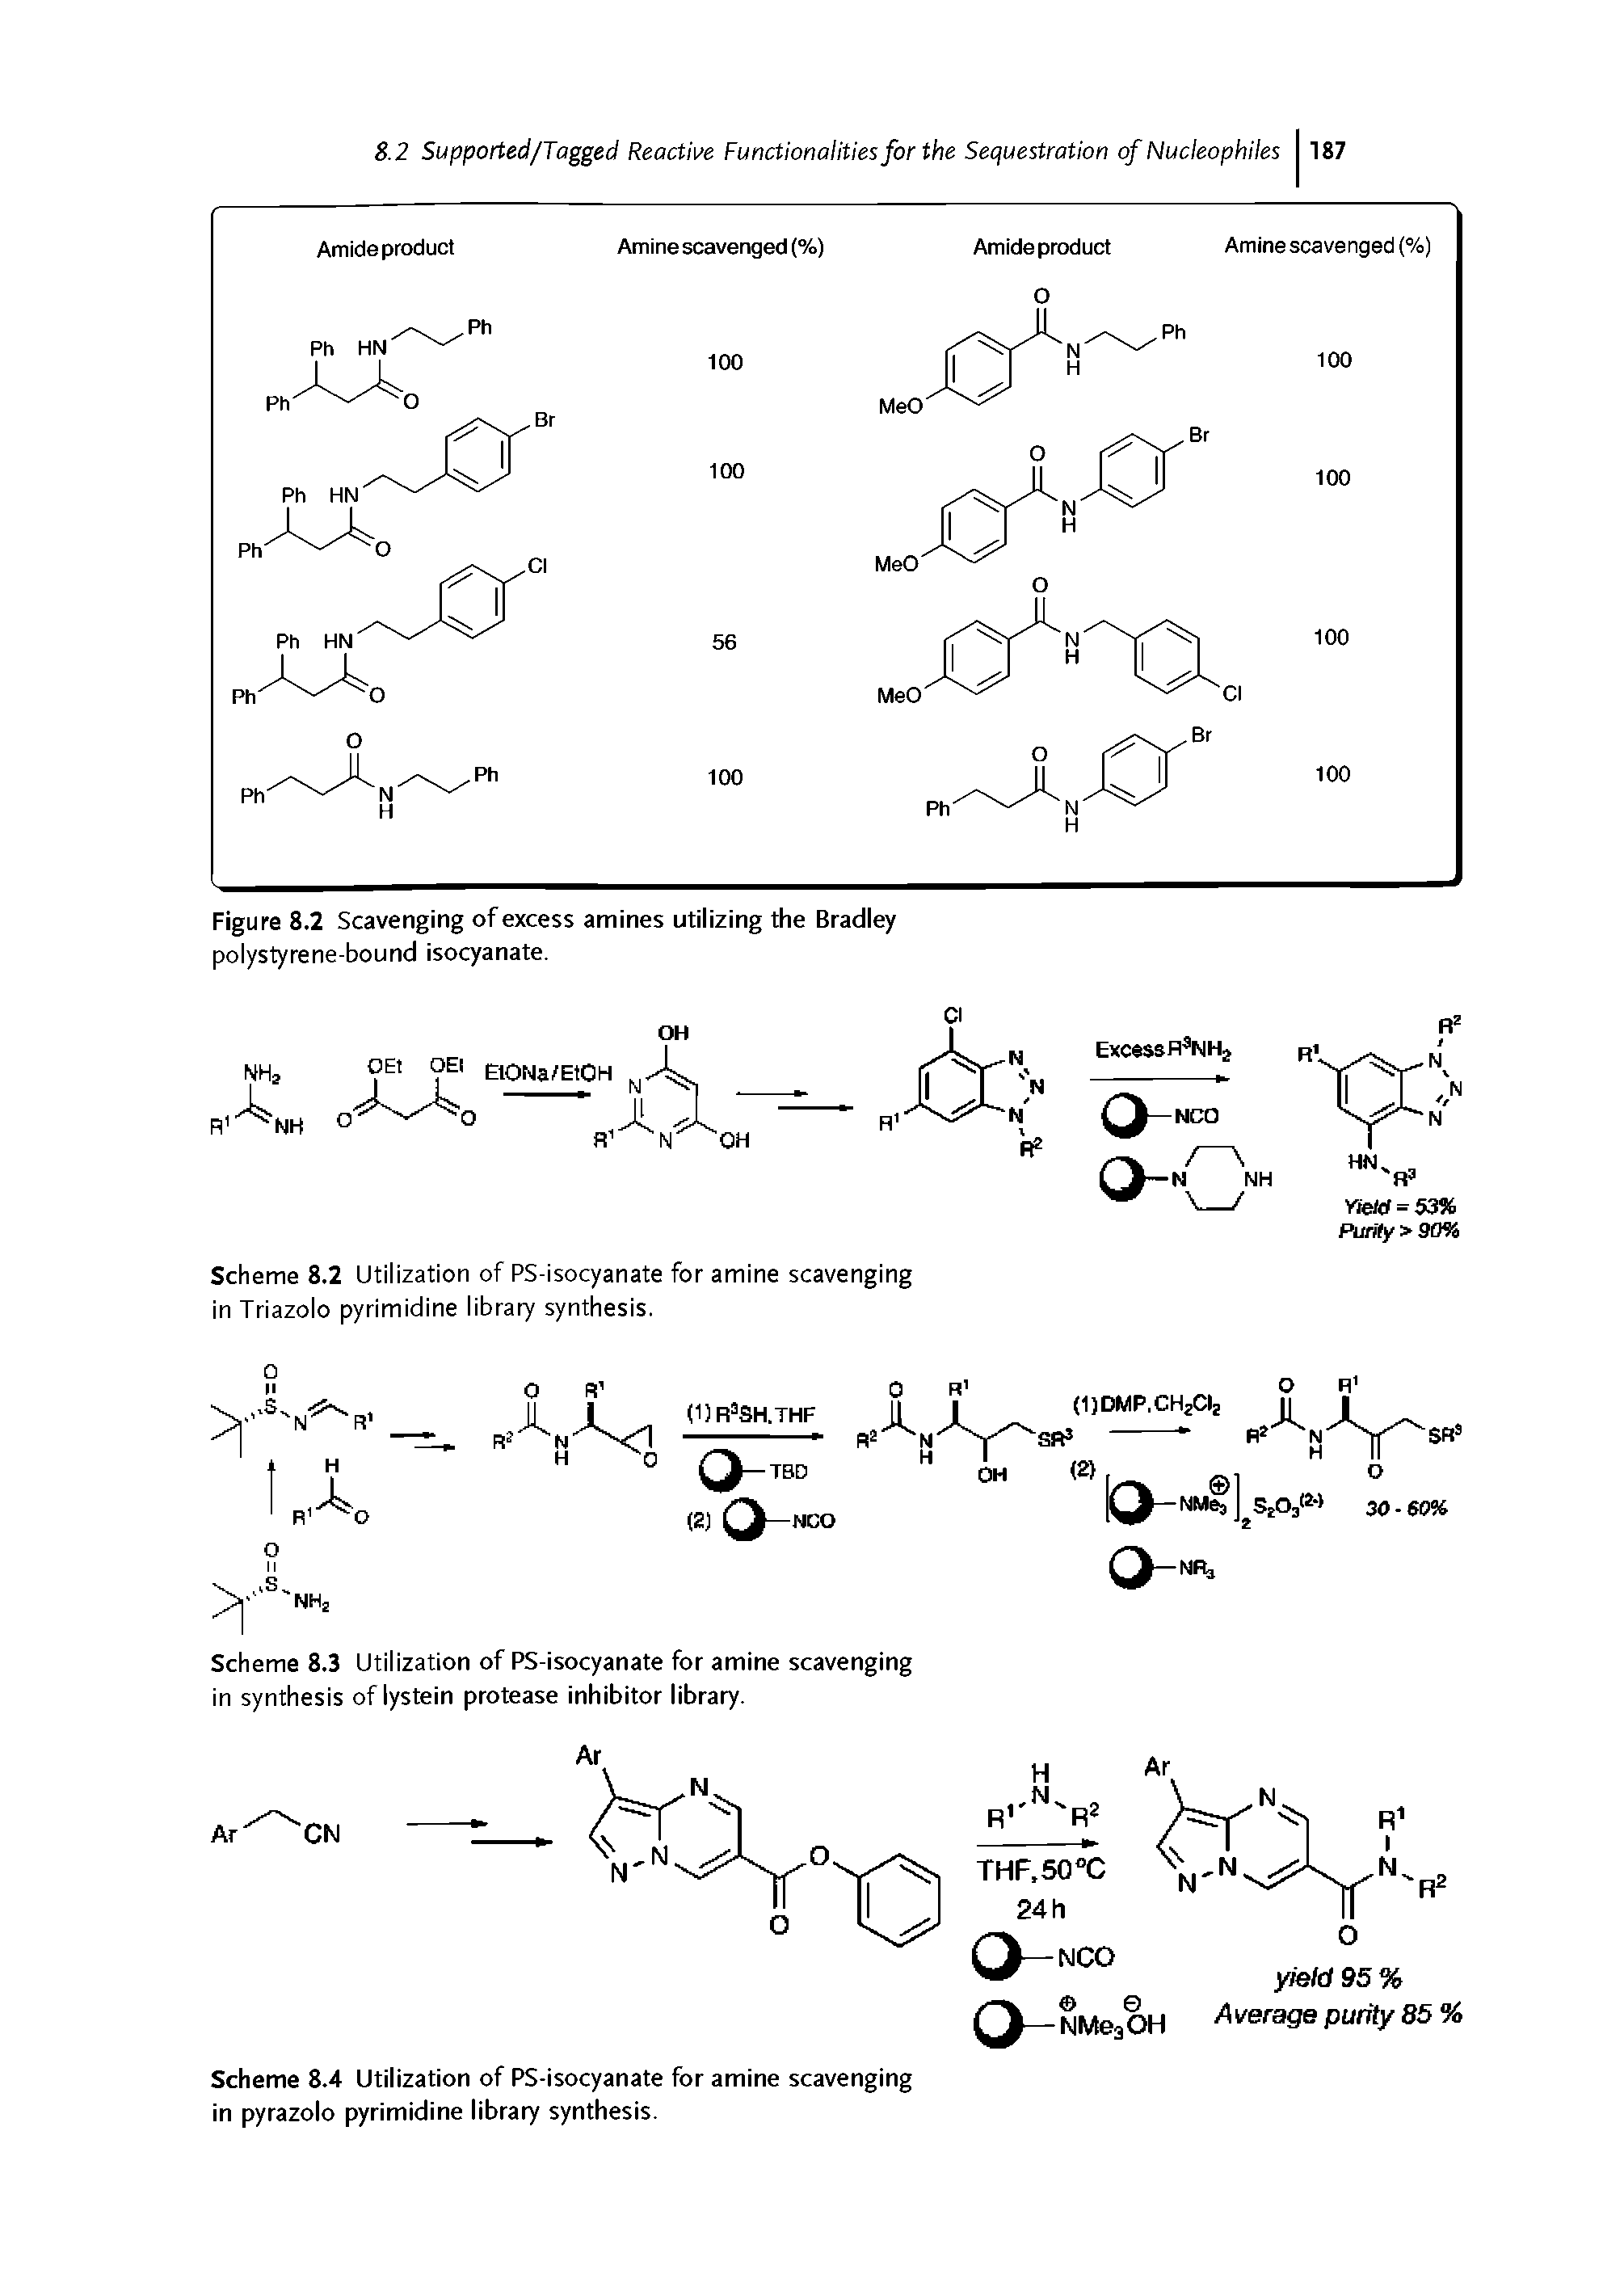 Scheme 8.2 Utilization of PS-isocyanate for amine scavenging in Triazolo pyrimidine library synthesis.